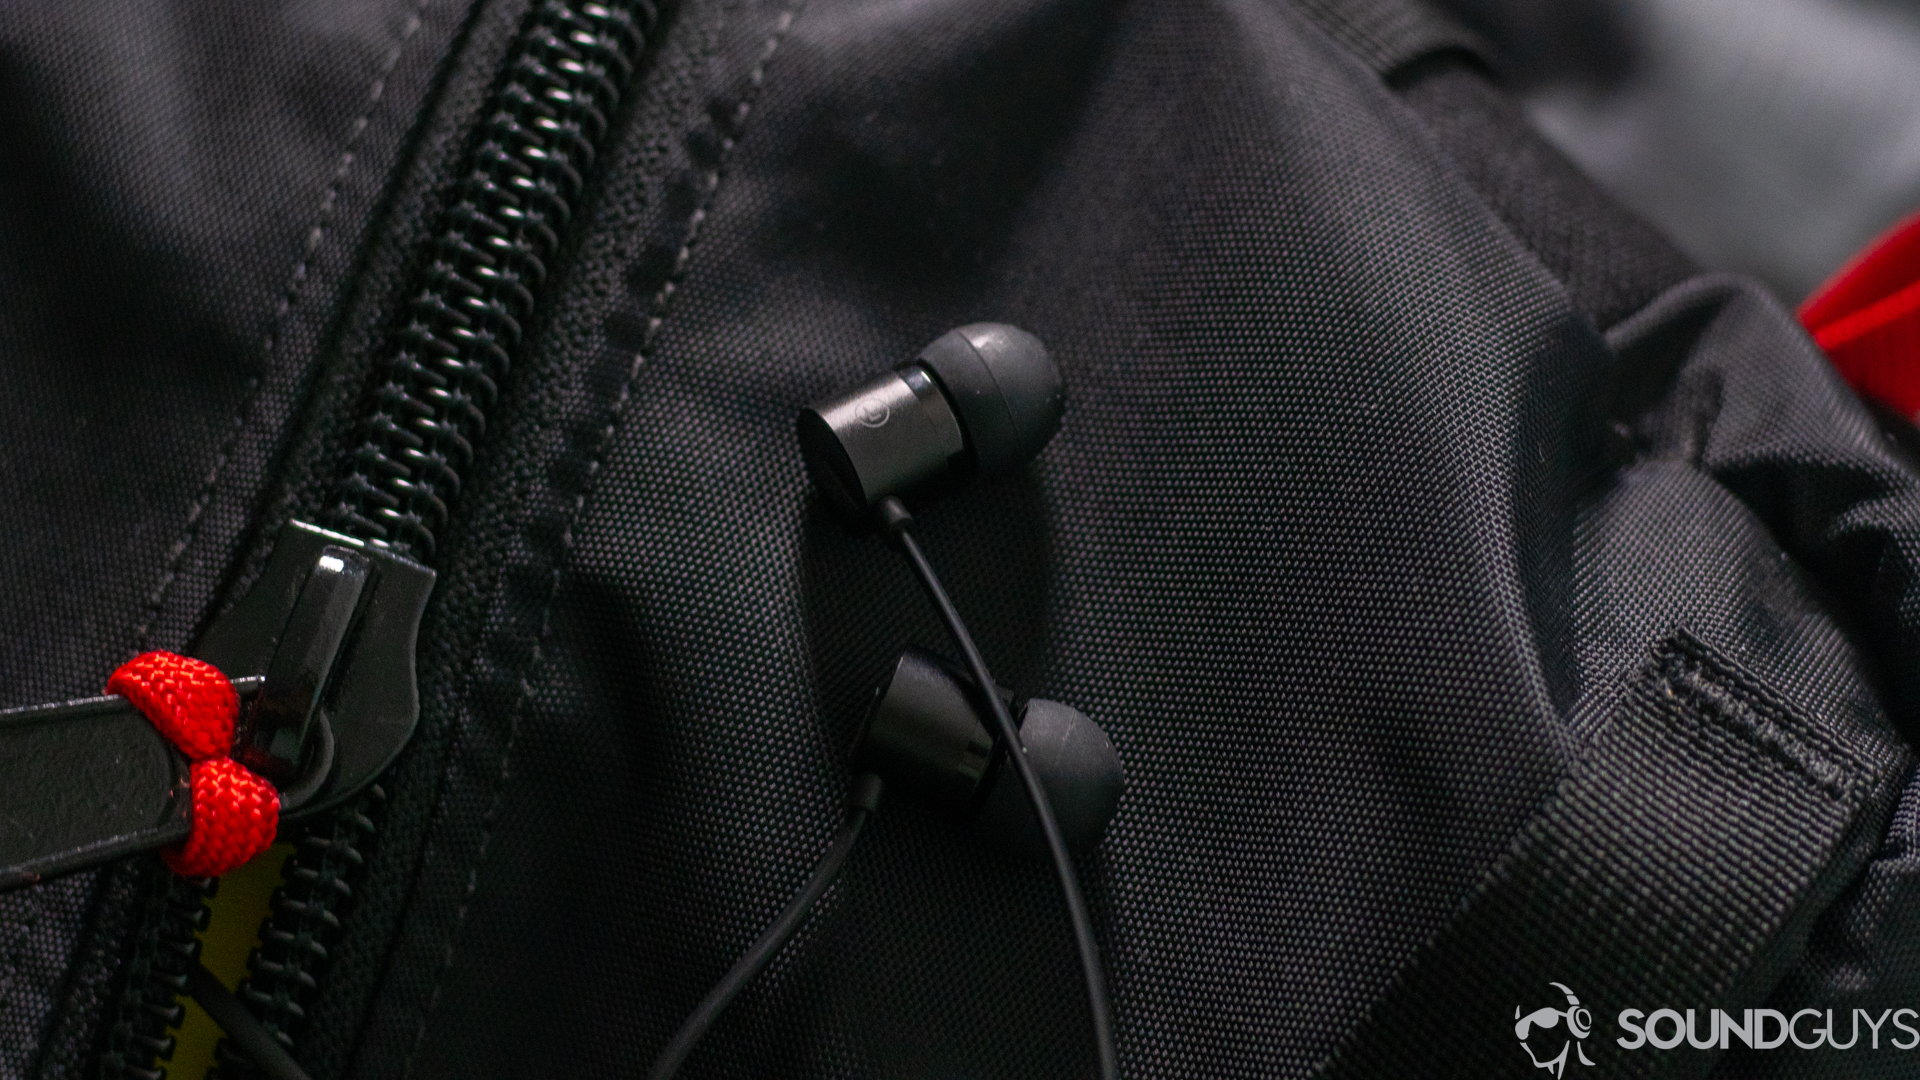 Pictured are the all-black aluminum OnePlus earbuds.